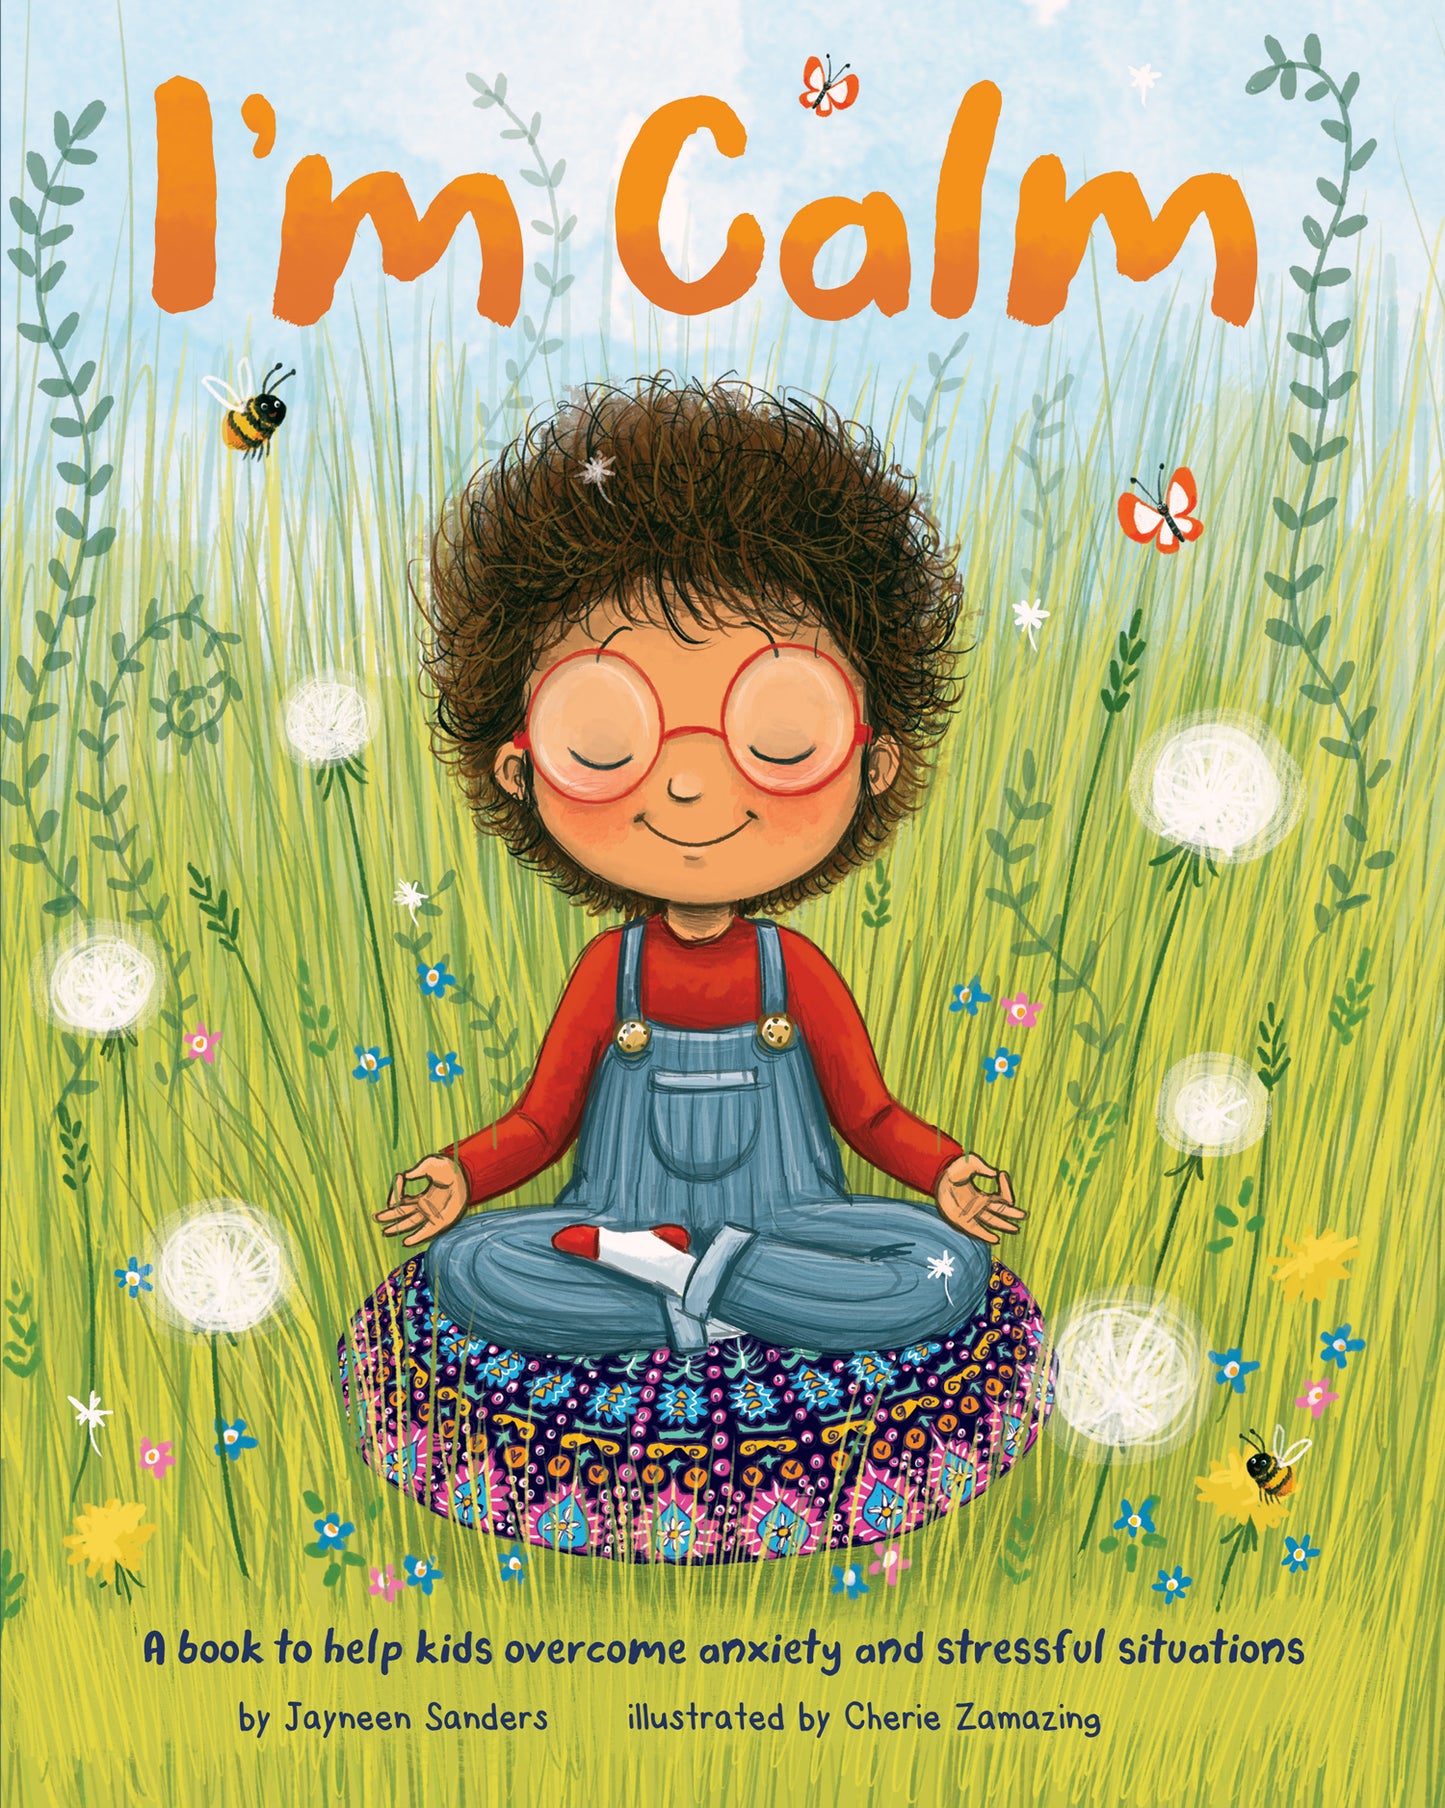 The cover of the book ‘I'm Calm’ by Jayneen Sanders.